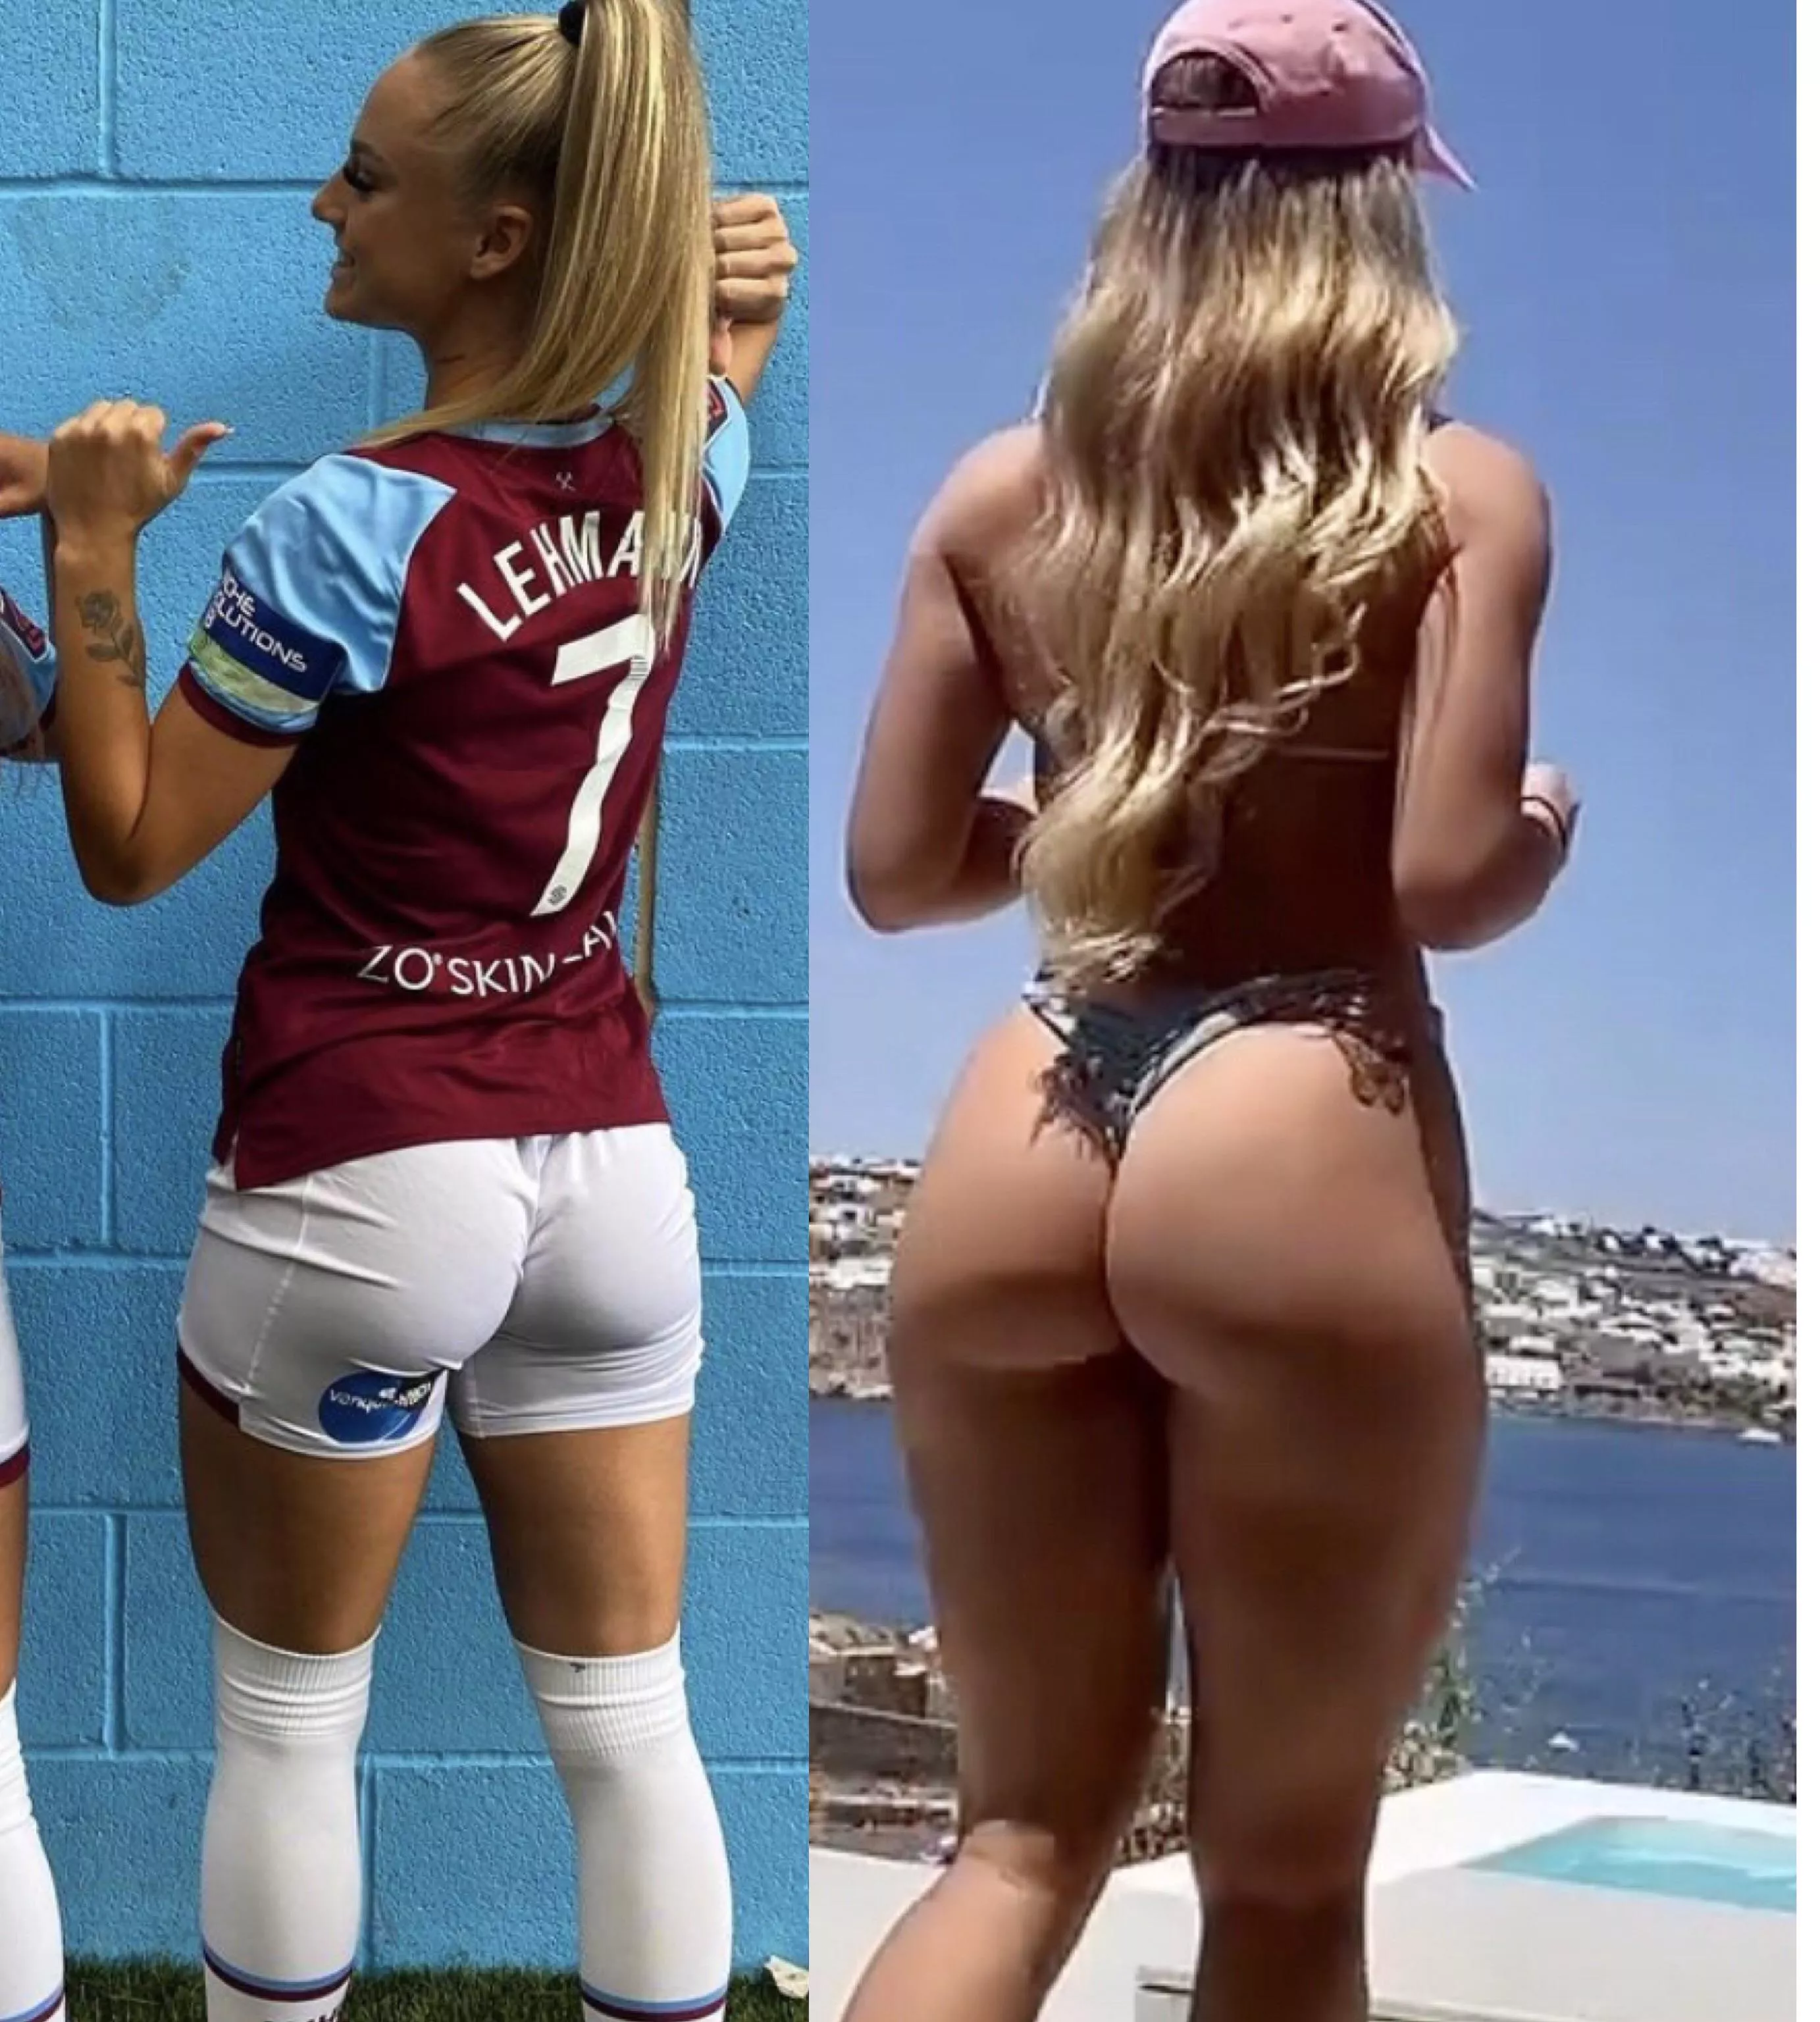 Browse swiss soccer player alisha lehmann - CelebrityButts for free on xxxp...